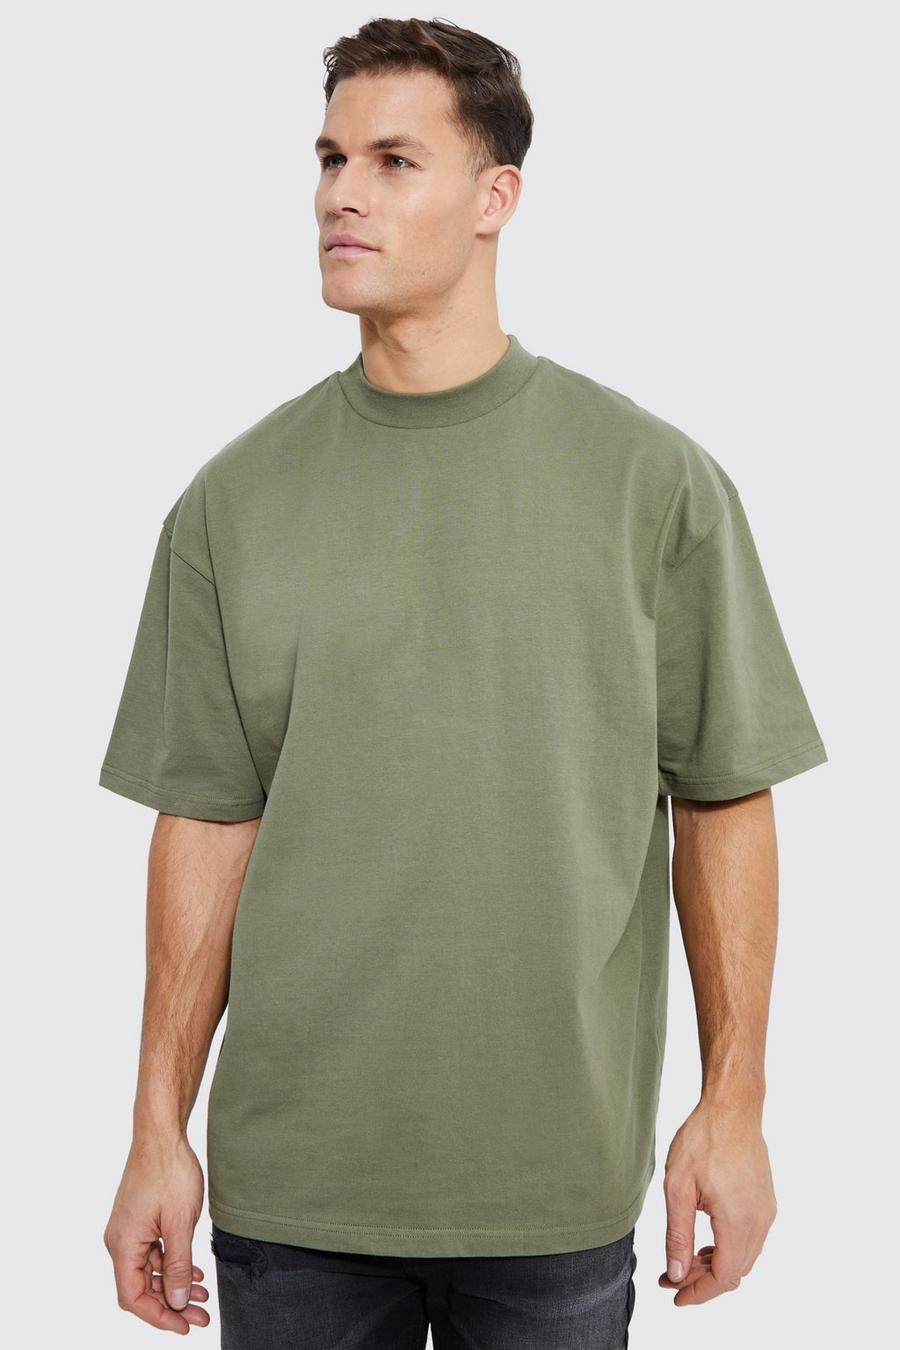 Forest green Tall Oversized Extended Neck Heavy T-shirt     